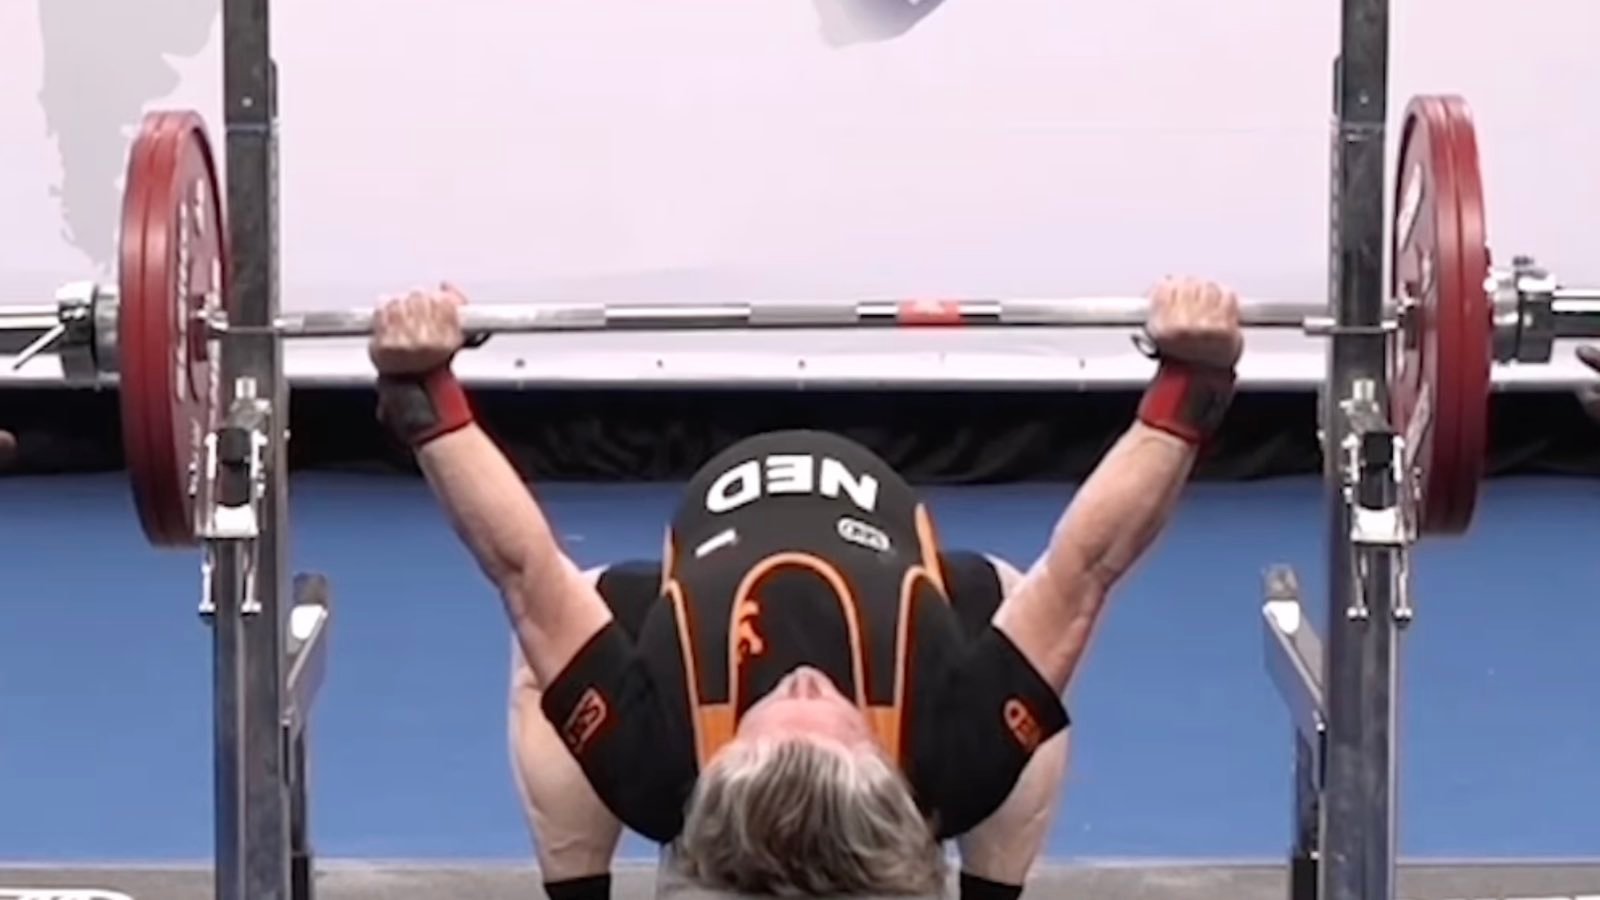 lelja-strik-(84kg)-bench-presses-1325-kilograms-(292.1-pounds)-for-raw-masters-ipf-world-record-–-breaking-muscle